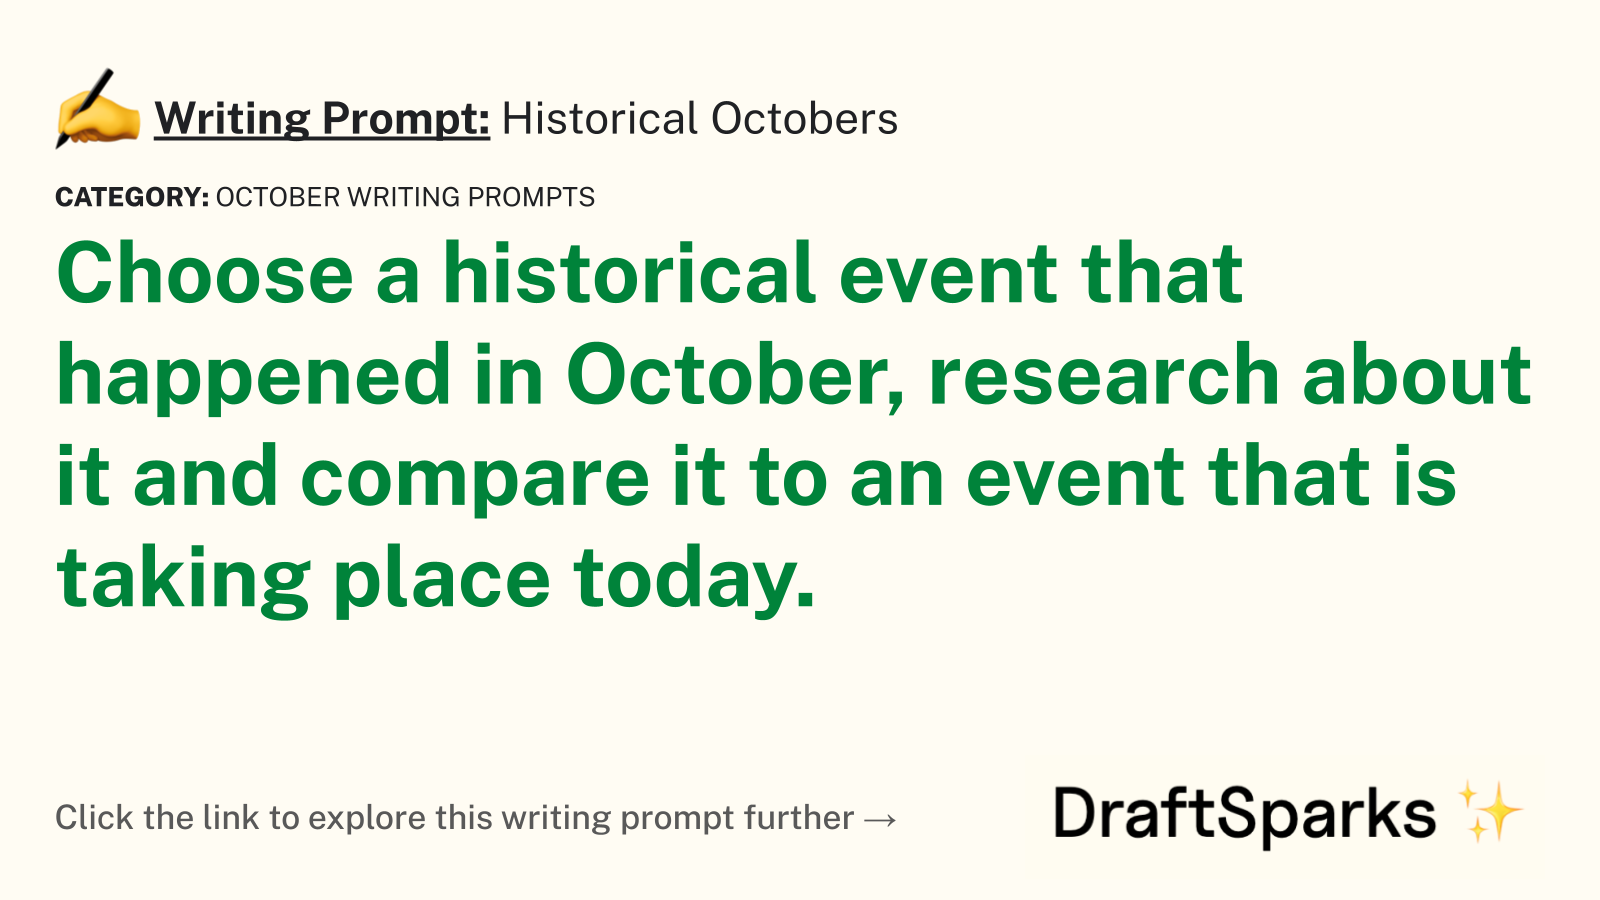 Historical Octobers